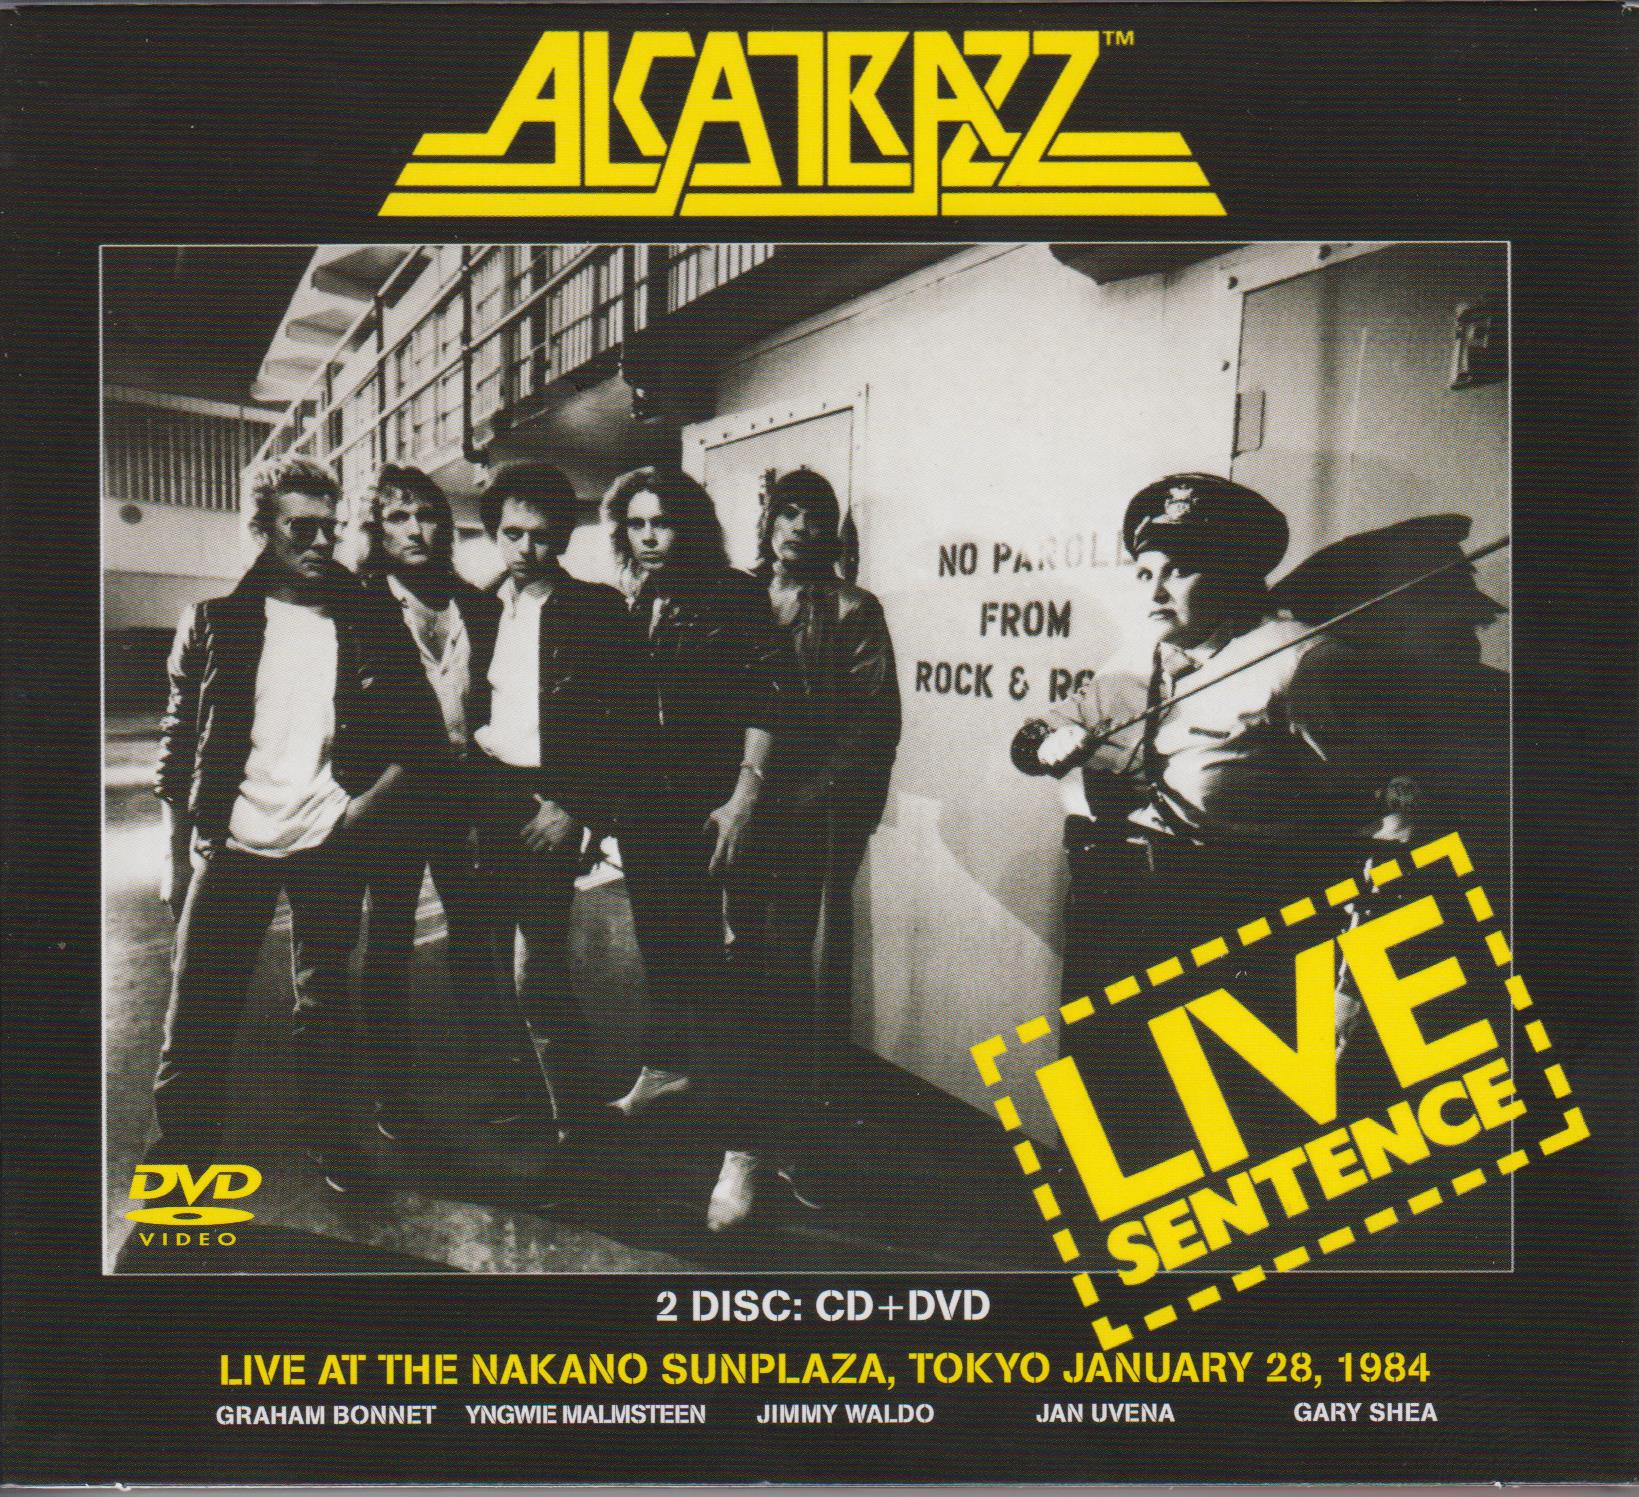 Alcatrazz - Live Sentence - Deluxe Edition CD Review - All About